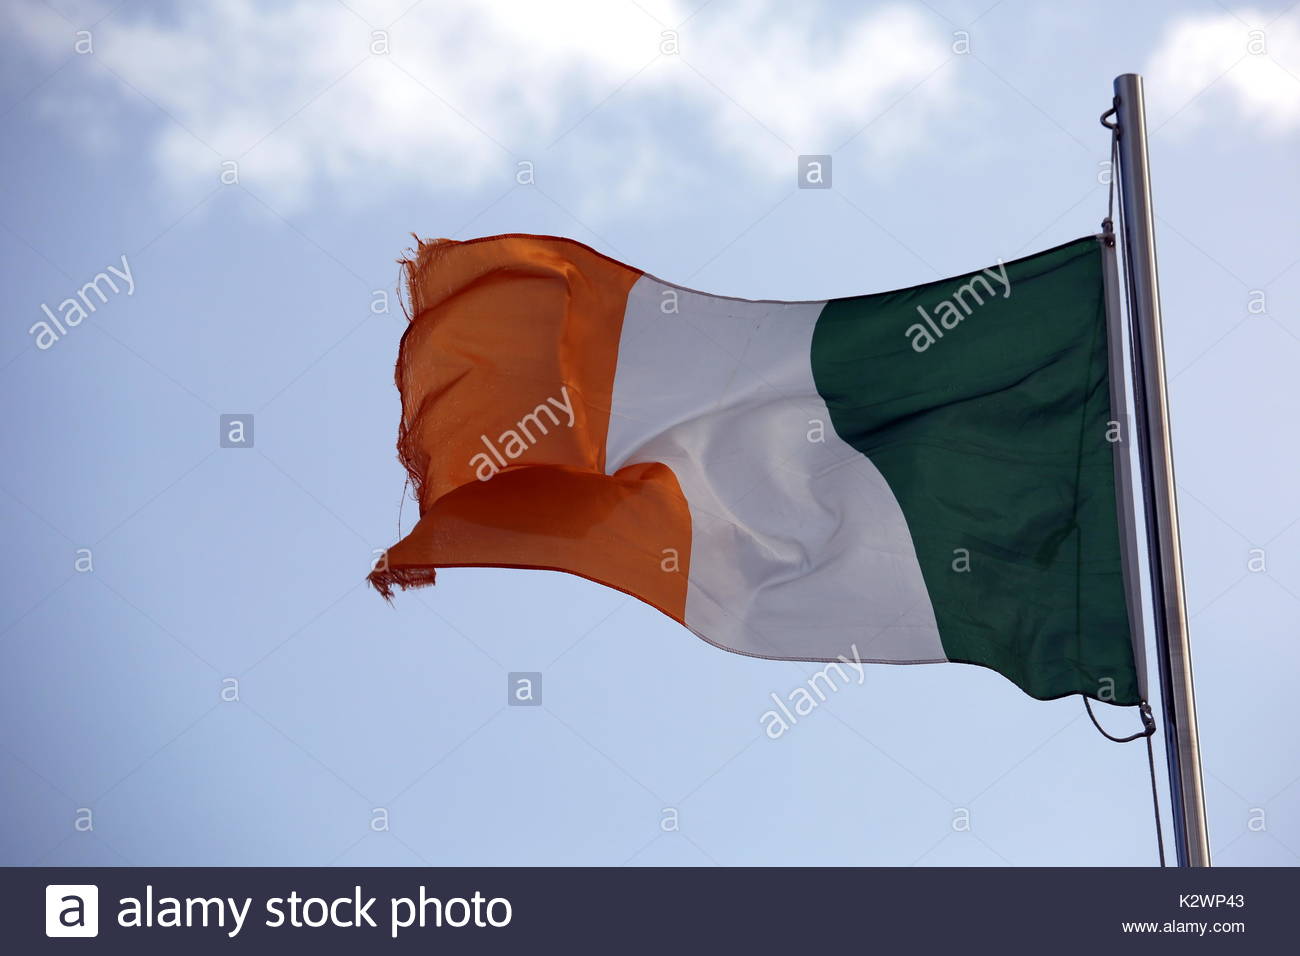 The Irish triclour, flag of the Republic of Ireland, blowing in the wind in Dublin on a summer's day. Stock Photo